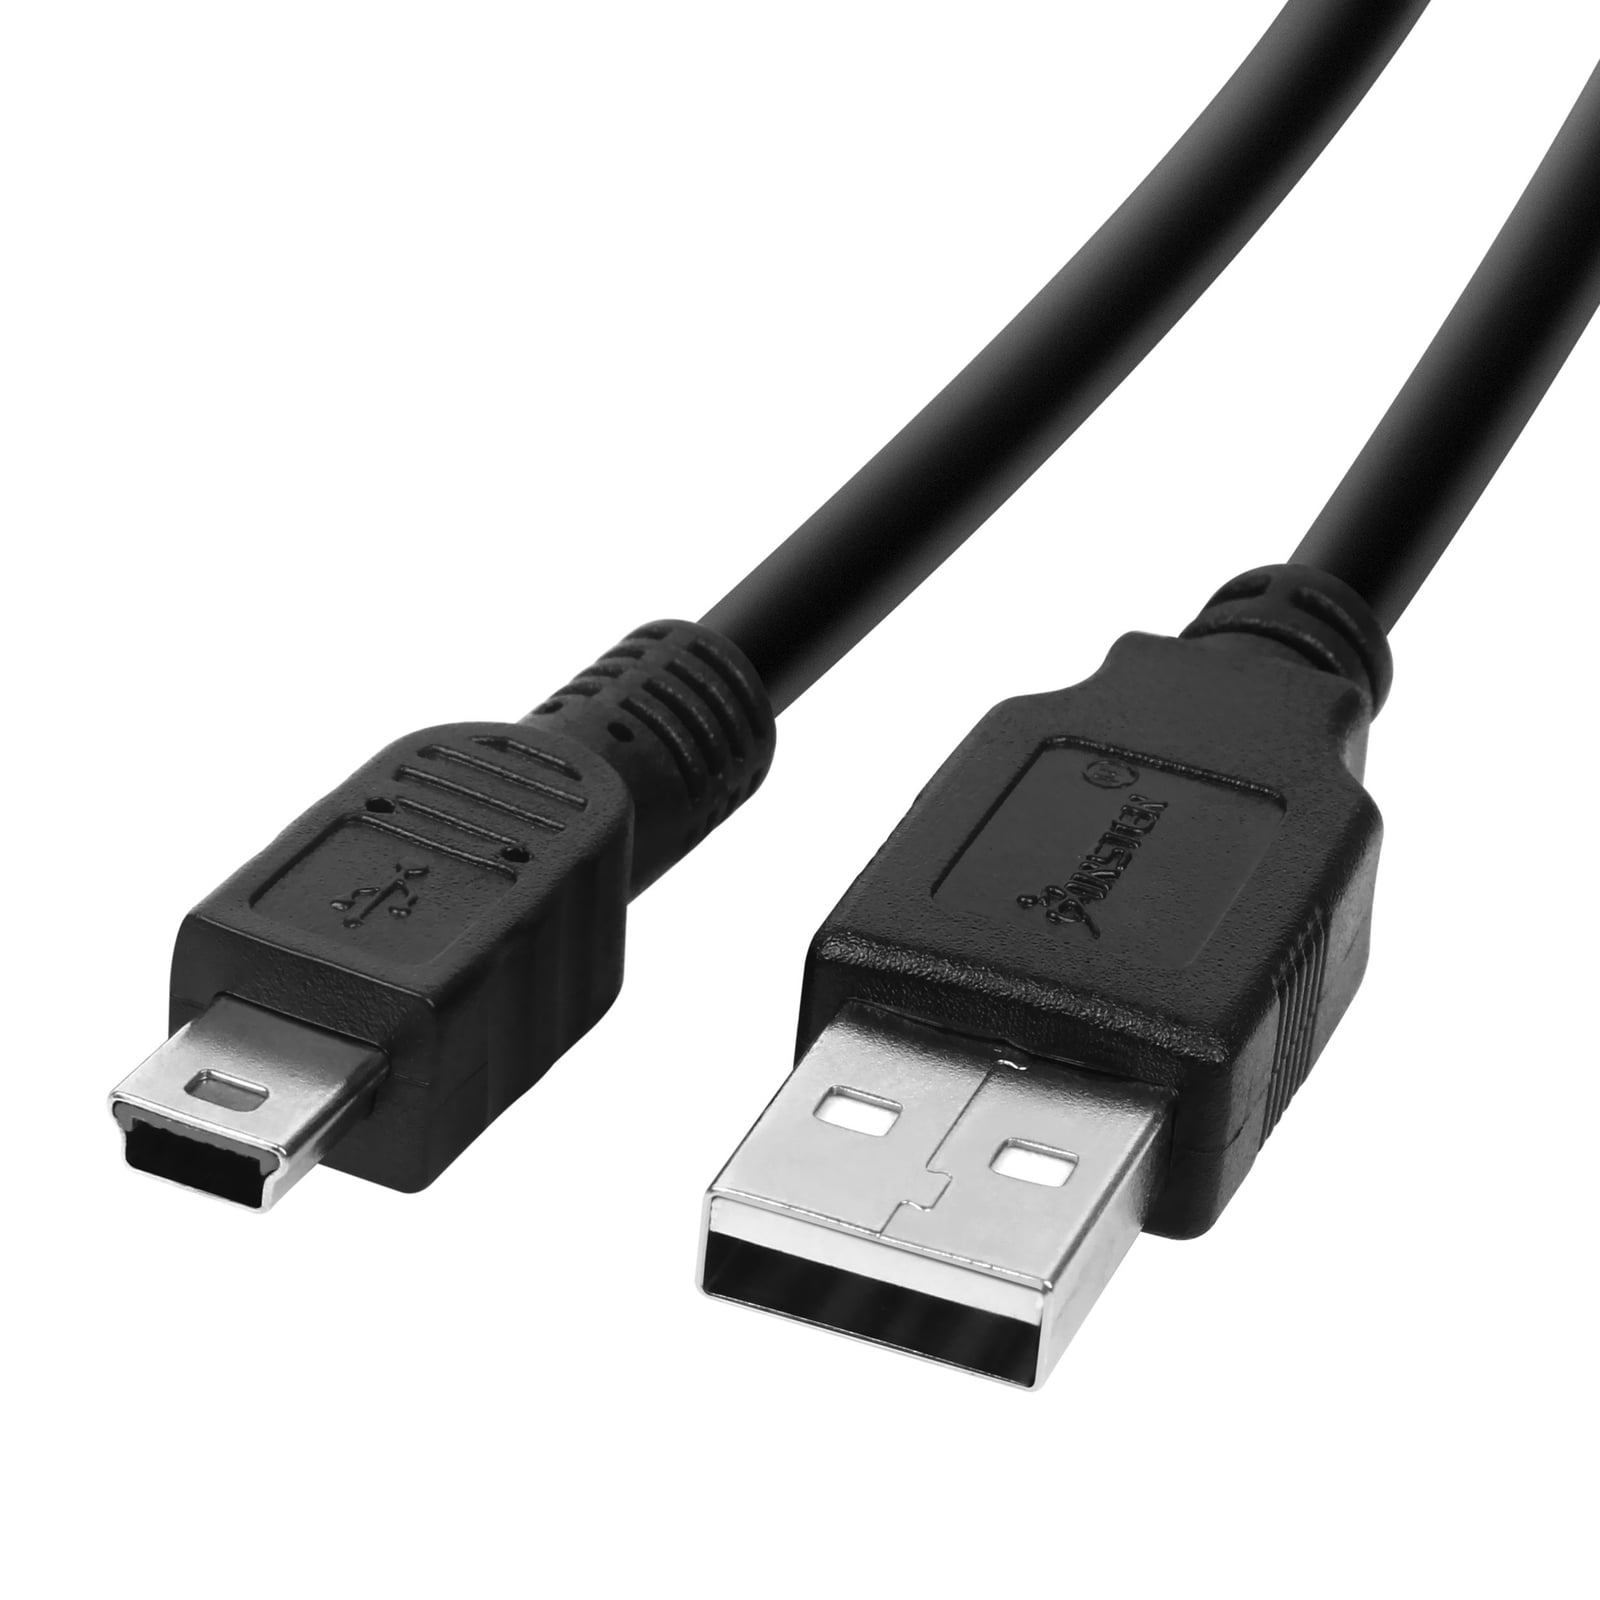 Connectors USB 2.0 Male to Mini USB Right Angled 90 Degree Flexible Spring Retractable Charging Data Cable for Car Navigation GPS MP3/MP4 Cable Length: Other 